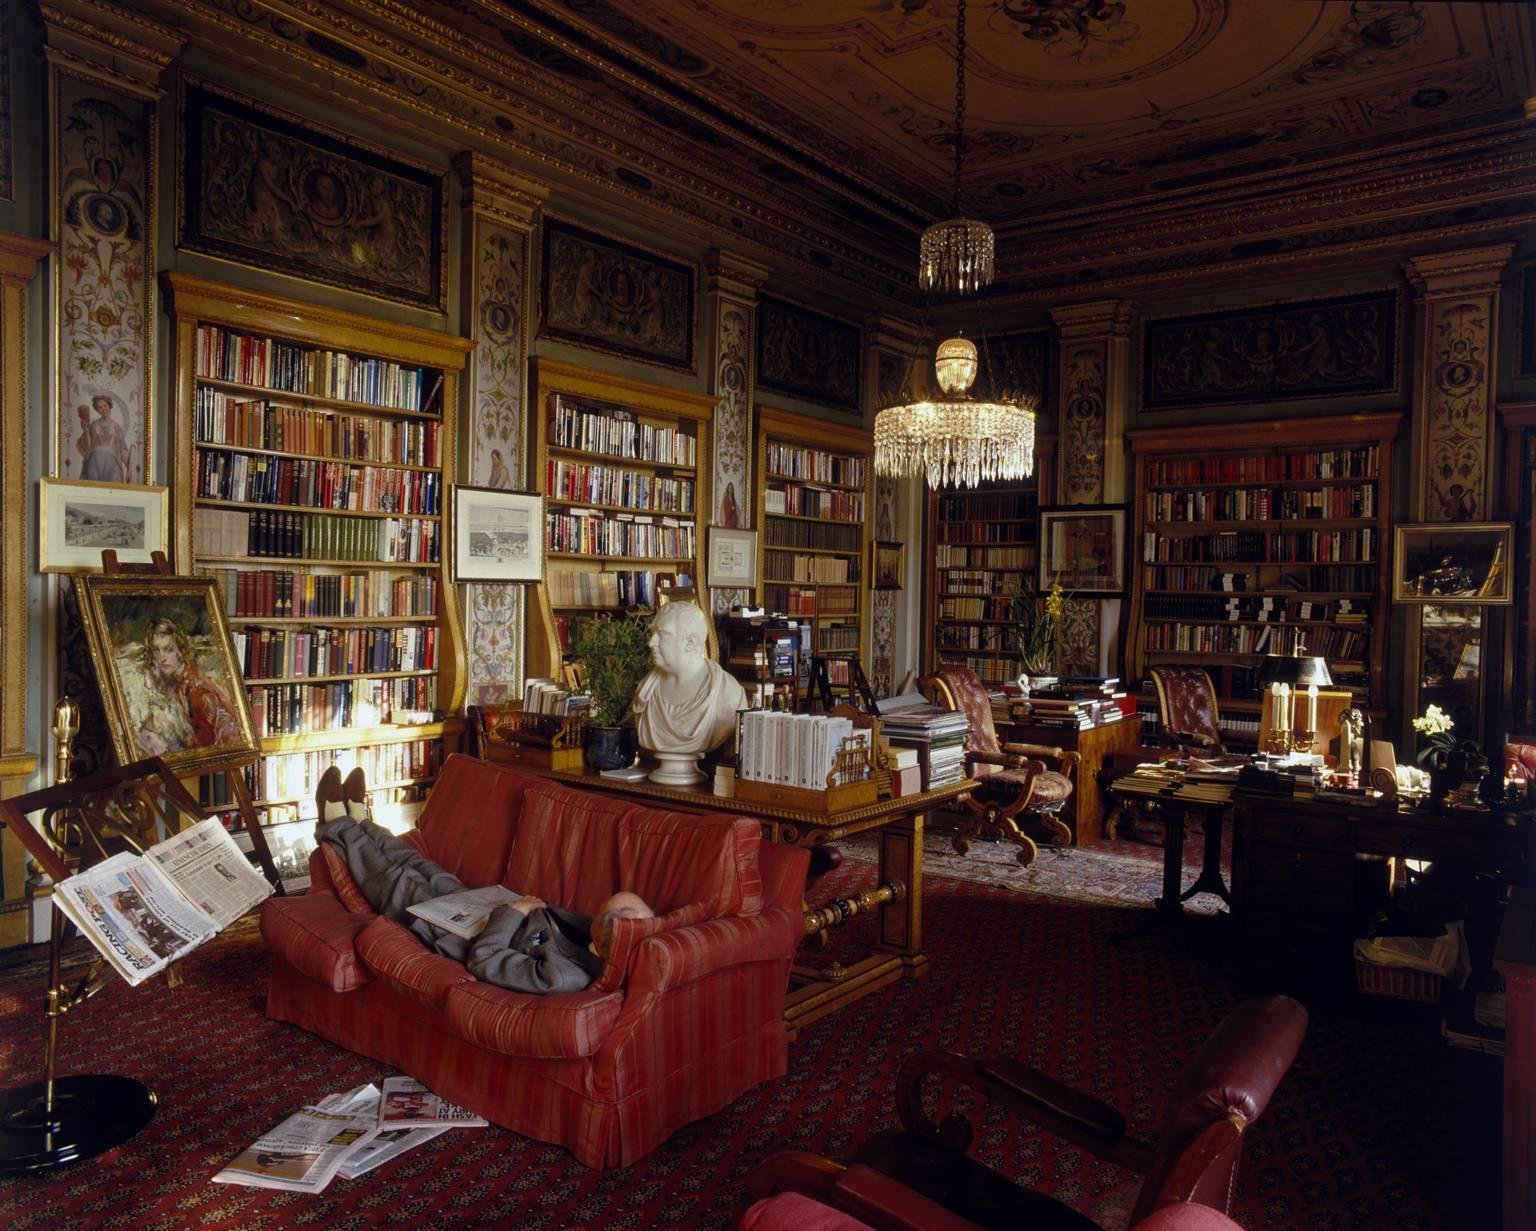 Christopher Simon Sykes Color Photograph - 'Chatsworth Library'  C-Type Print  *Signed, Limited Edition*)